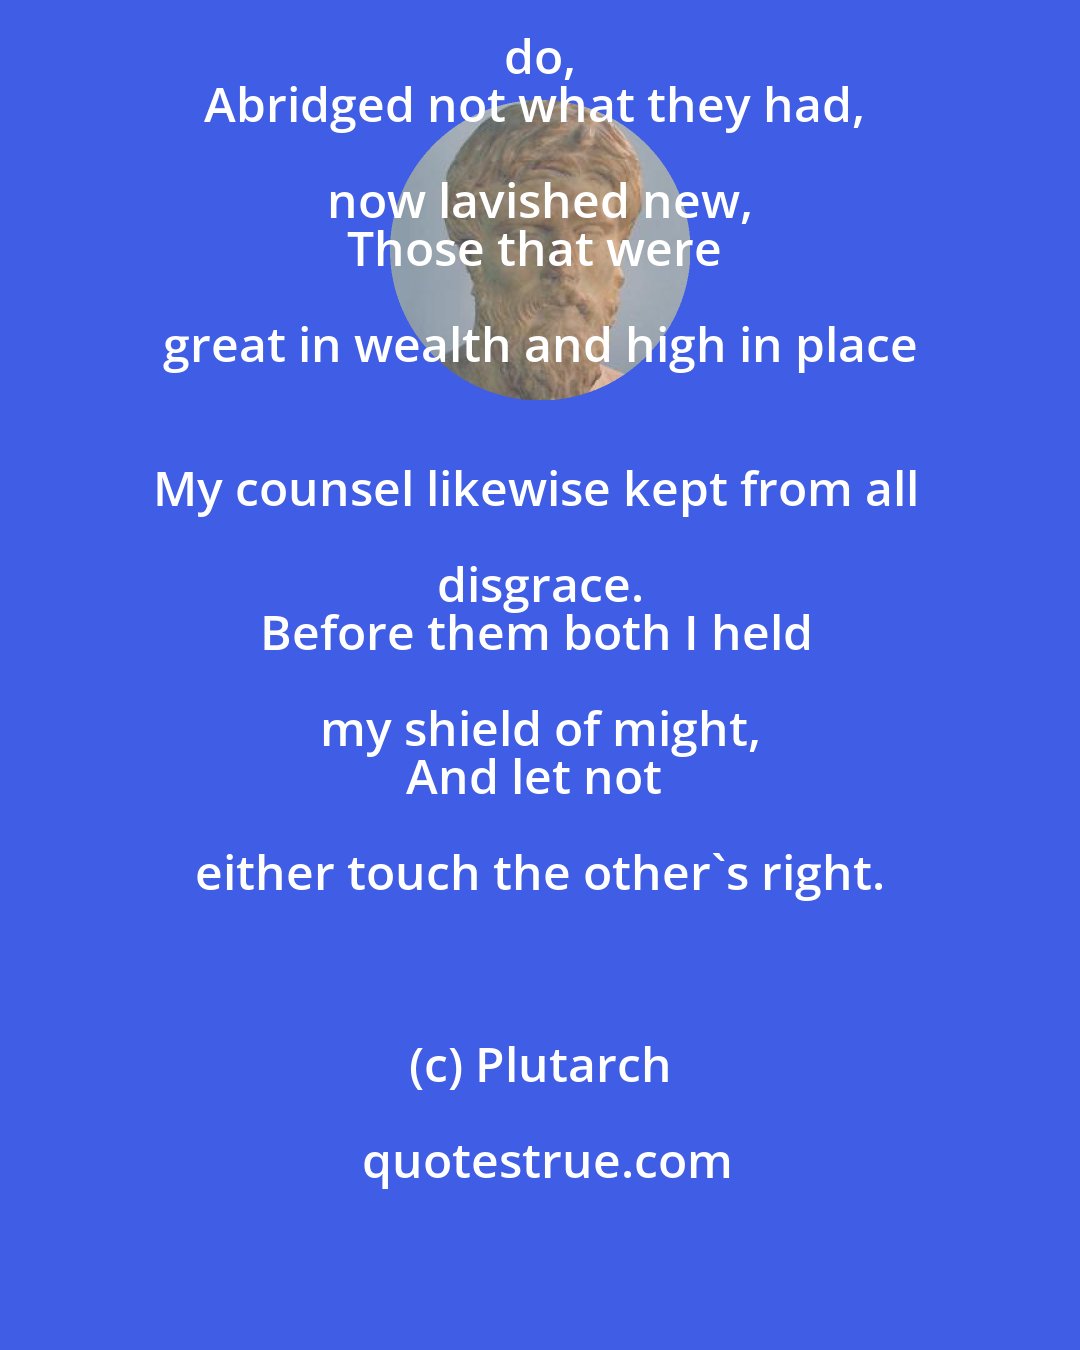 Plutarch: Such power I gave the people as might do, 
Abridged not what they had, now lavished new, 
Those that were great in wealth and high in place 
My counsel likewise kept from all disgrace. 
Before them both I held my shield of might, 
And let not either touch the other's right.